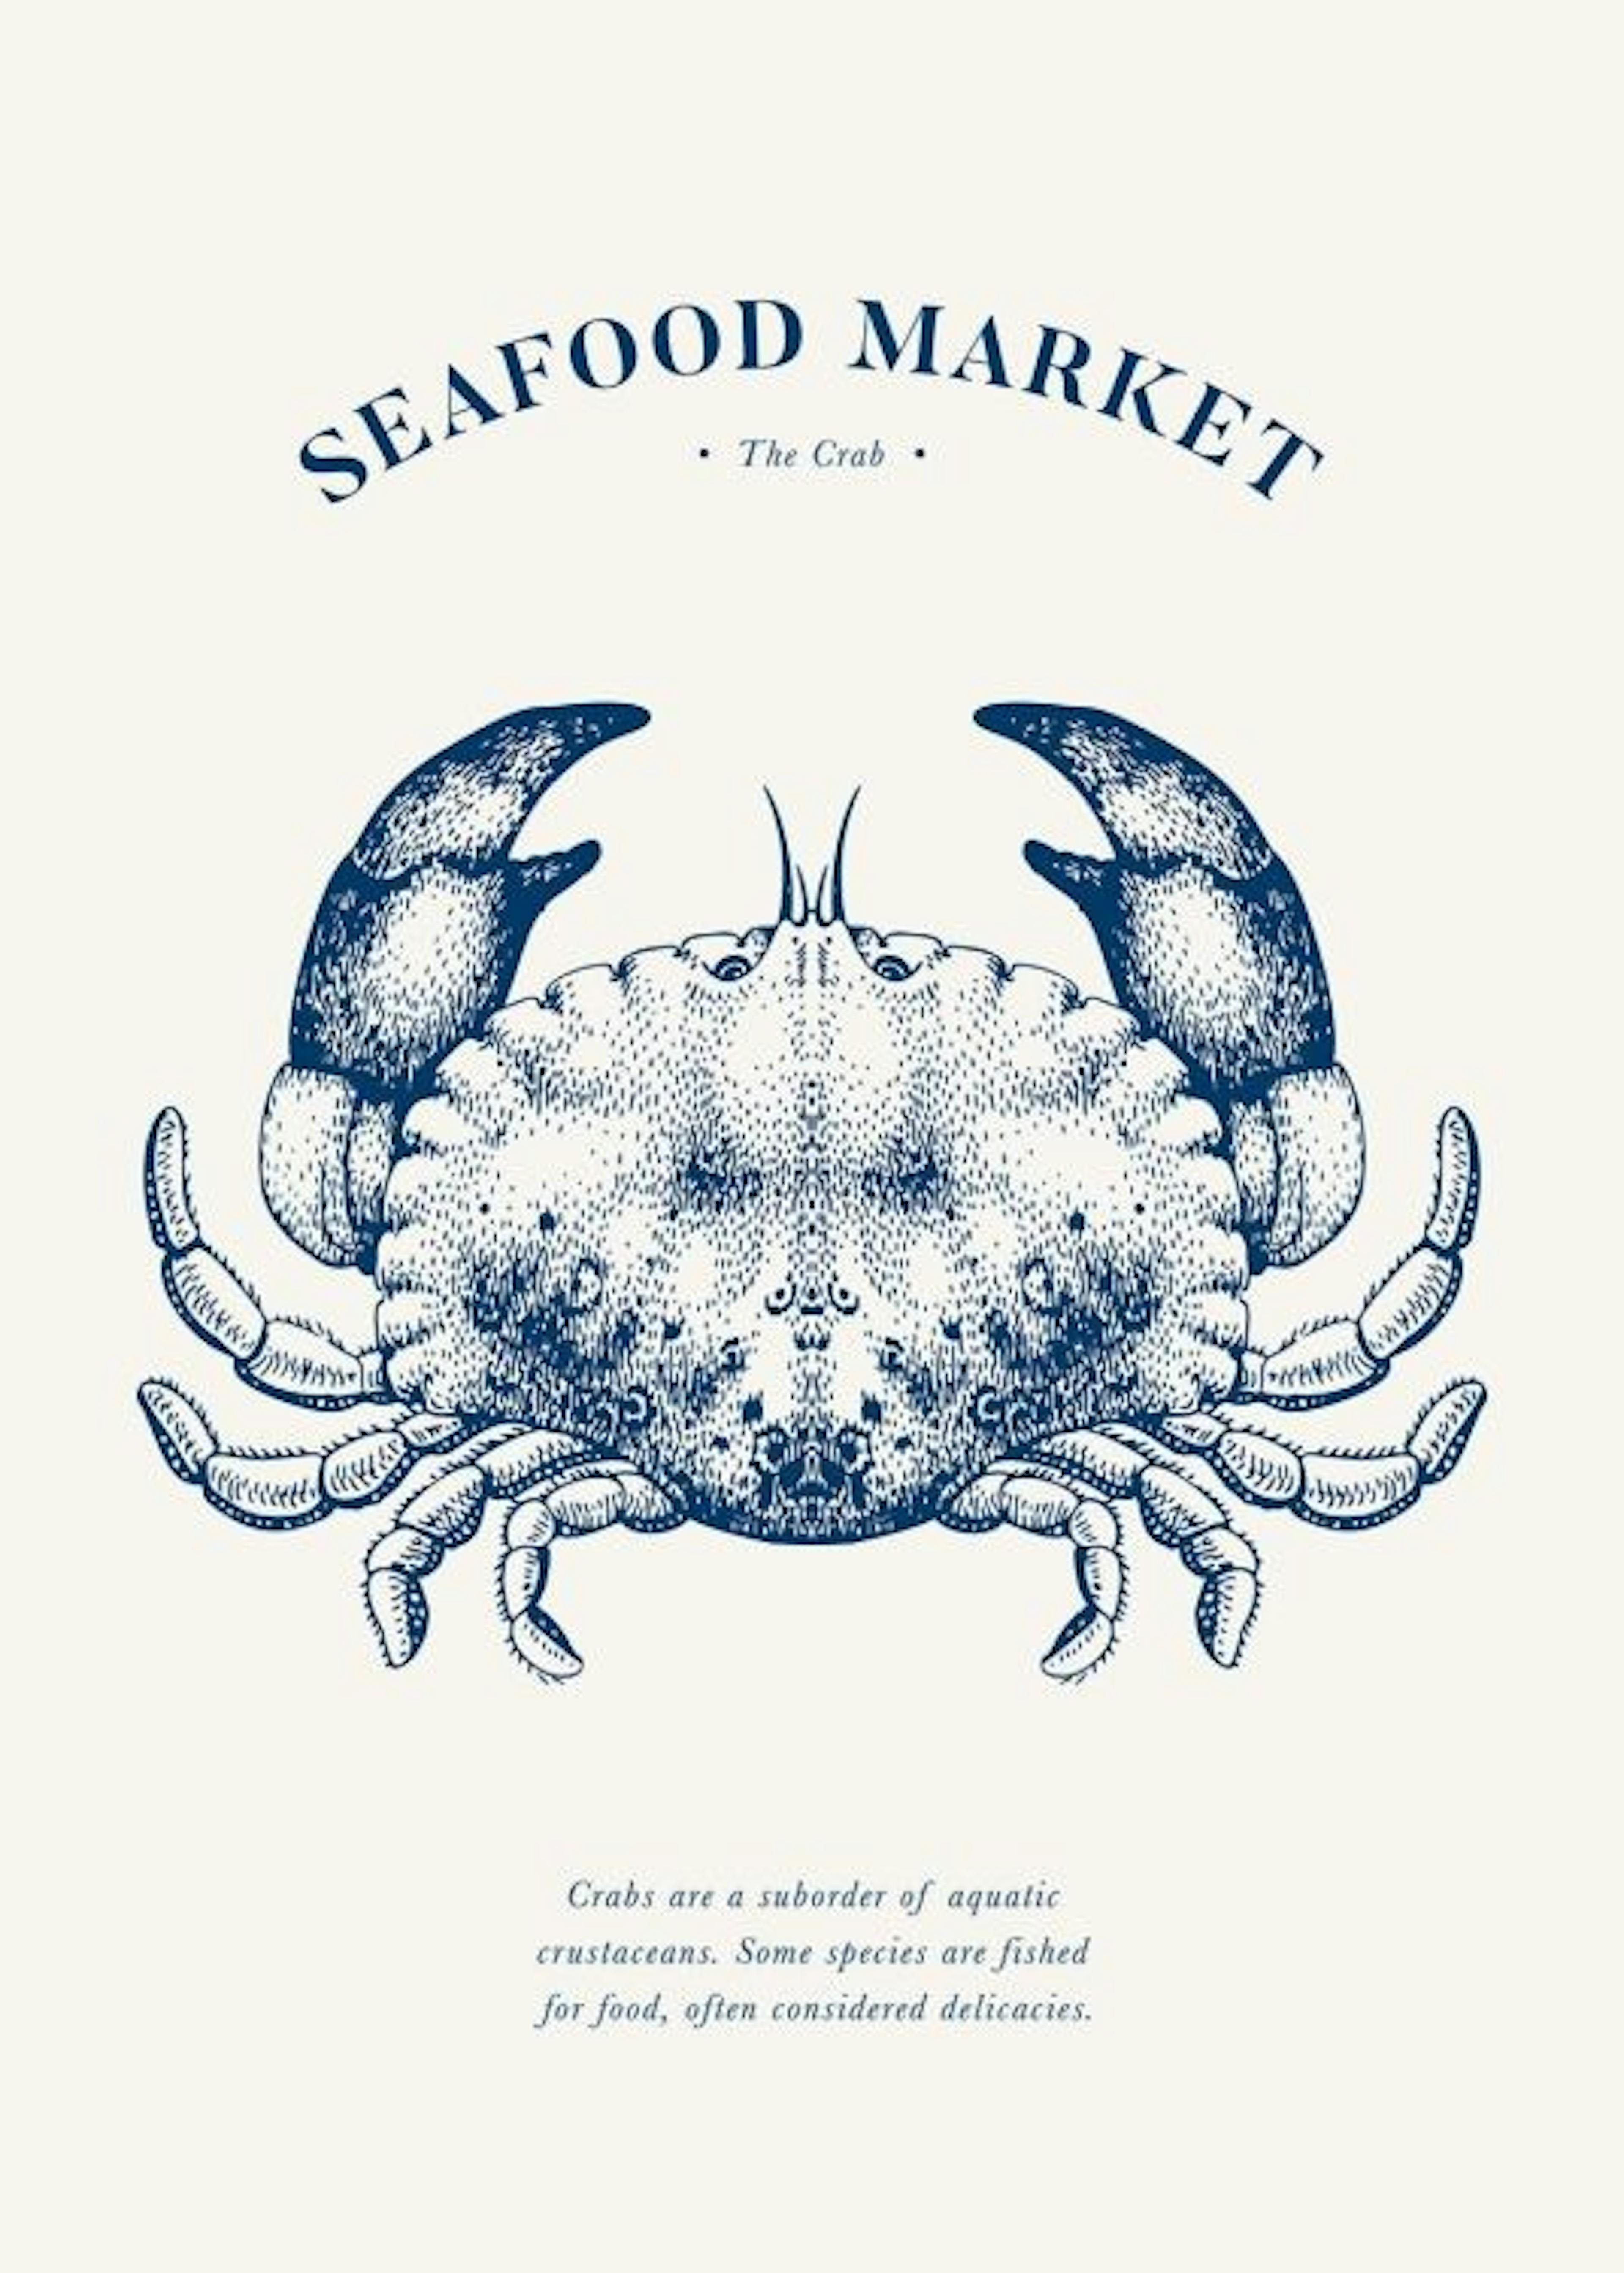 Seafood Market - The Crab Poster